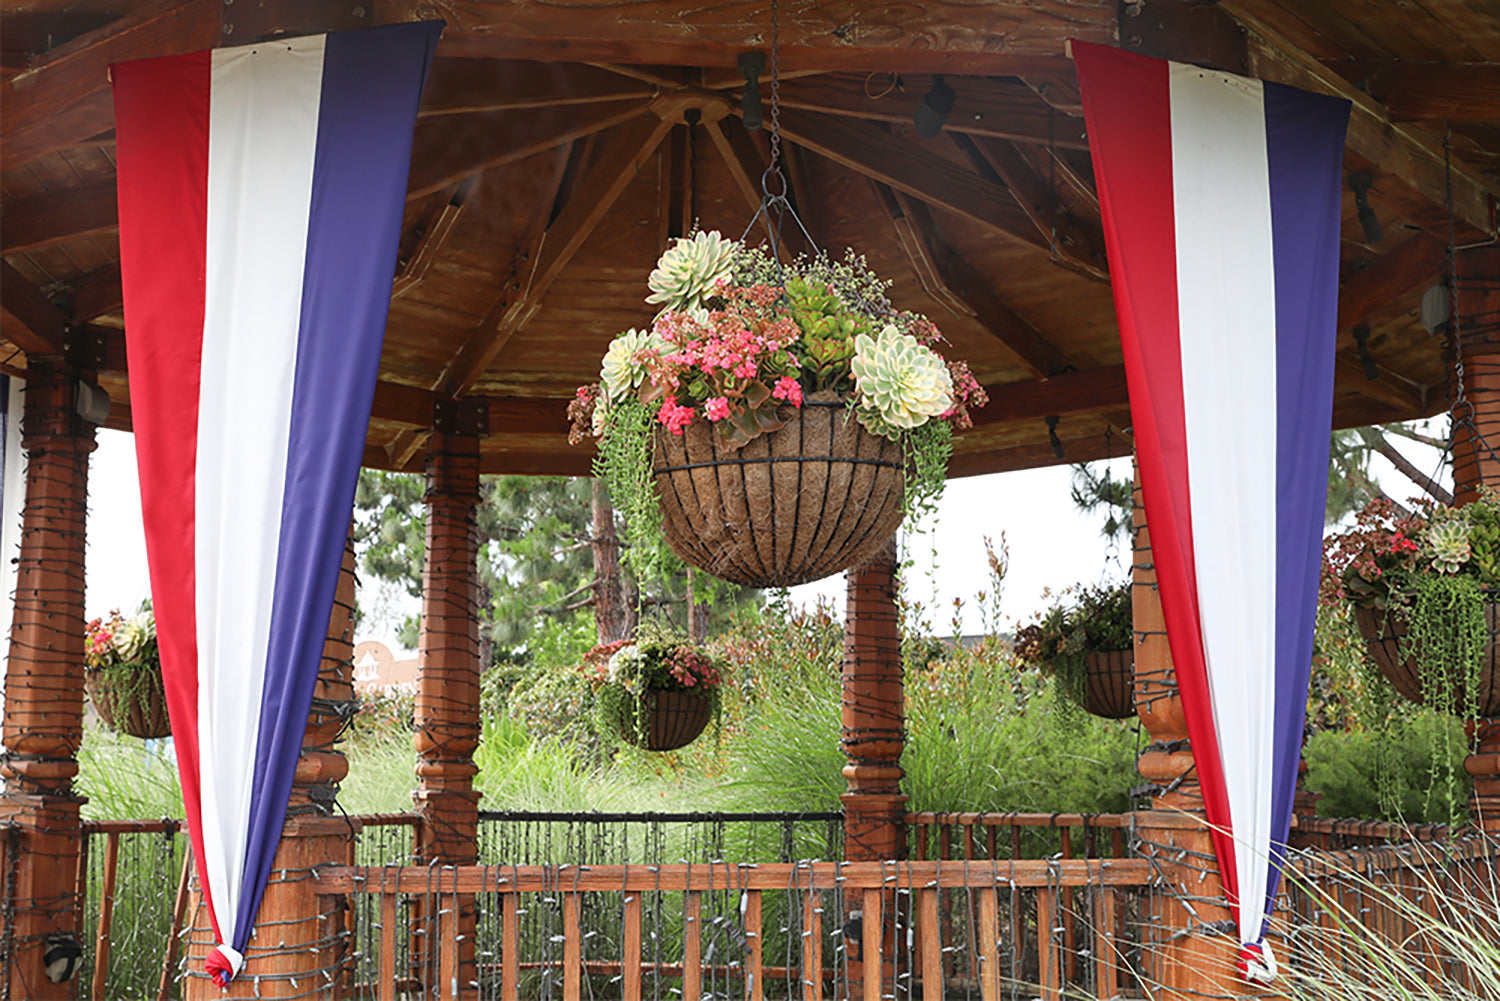 Patriotic Home and Garden Decor for Fourth of July